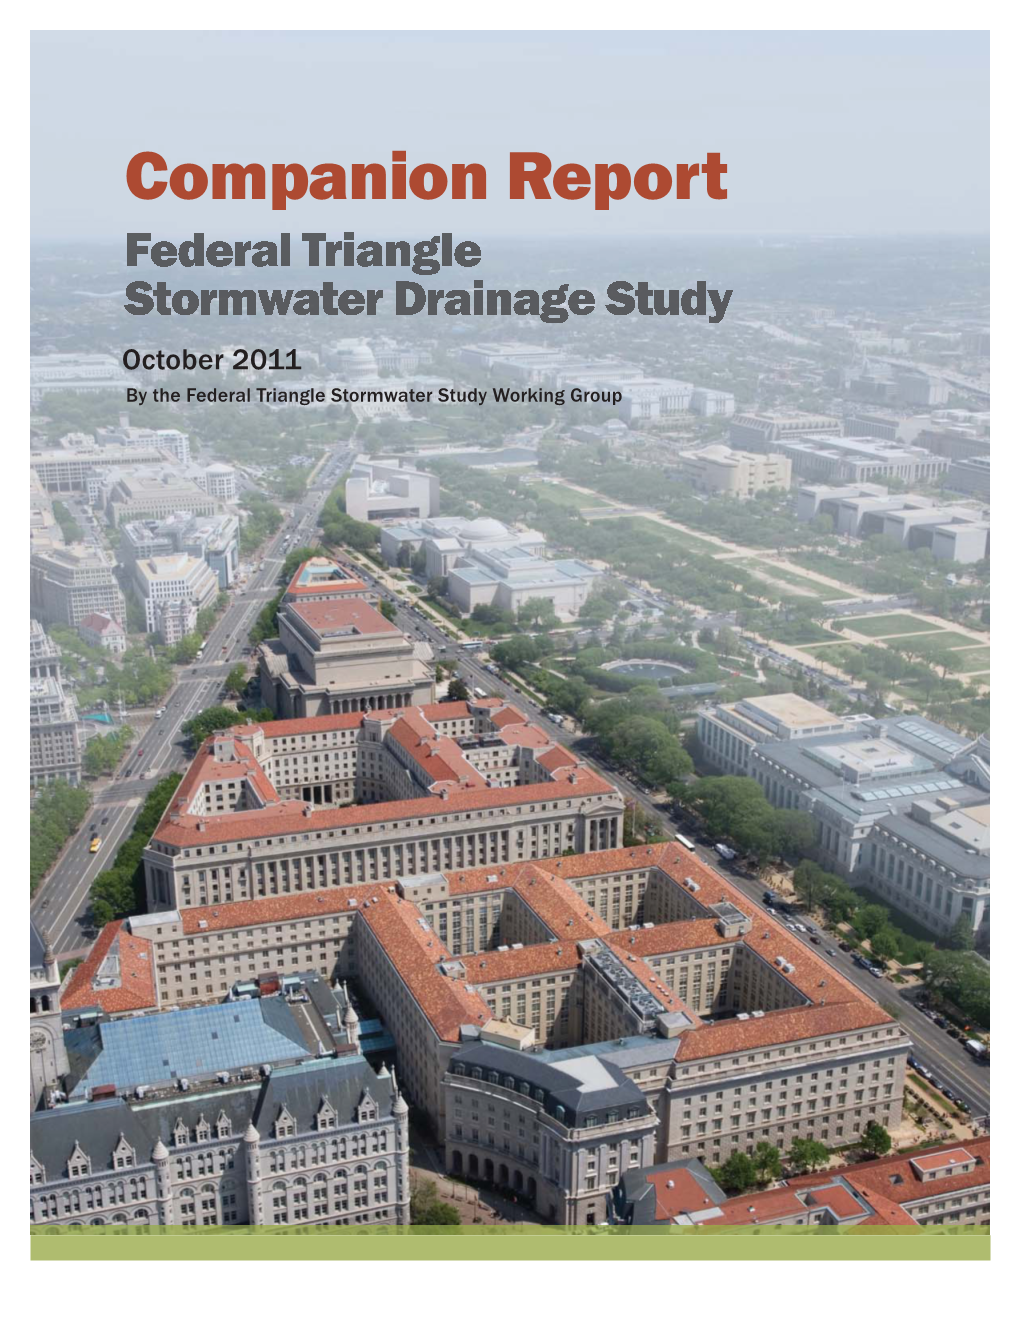 Companion Report, Federal Triangle Stormwater Drainage Study